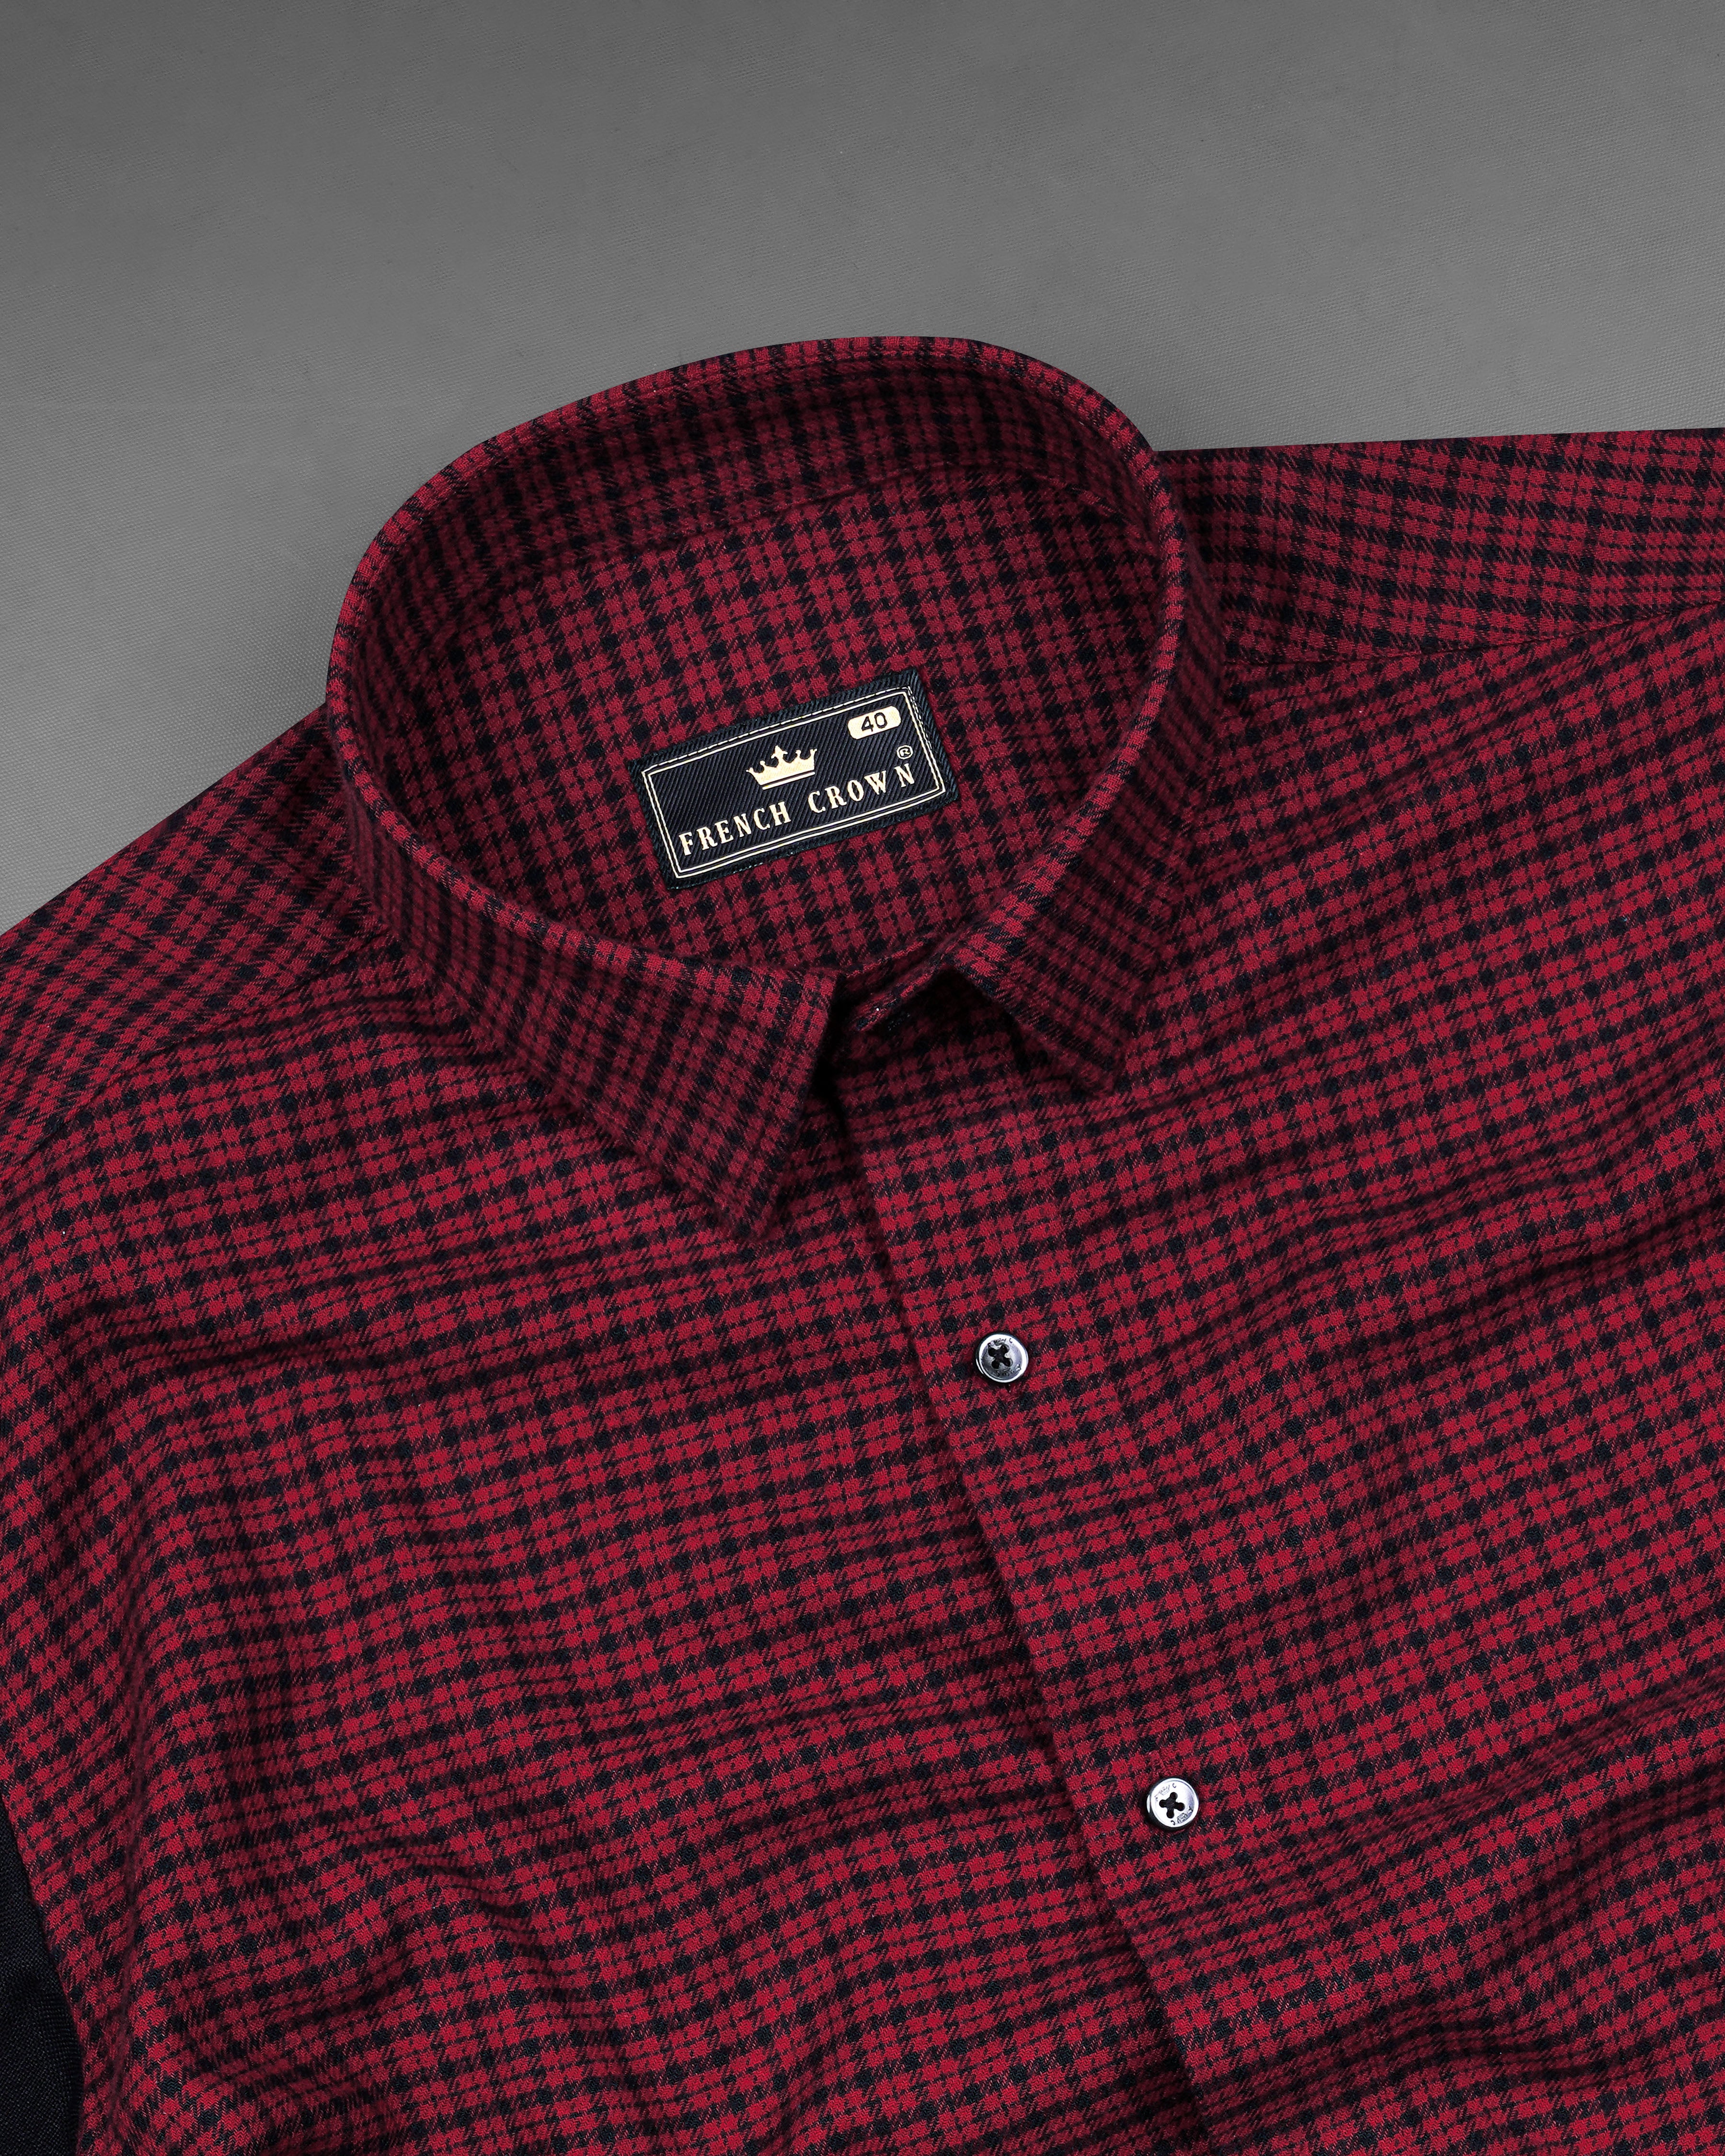 Claret Red Checkered and Black Premium Flannel Designer Shirt 8174-BLK-P113-38, 8174-BLK-P113-H-38, 8174-BLK-P113-39, 8174-BLK-P113-H-39, 8174-BLK-P113-40, 8174-BLK-P113-H-40, 8174-BLK-P113-42, 8174-BLK-P113-H-42, 8174-BLK-P113-44, 8174-BLK-P113-H-44, 8174-BLK-P113-46, 8174-BLK-P113-H-46, 8174-BLK-P113-48, 8174-BLK-P113-H-48, 8174-BLK-P113-50, 8174-BLK-P113-H-50, 8174-BLK-P113-52, 8174-BLK-P113-H-52